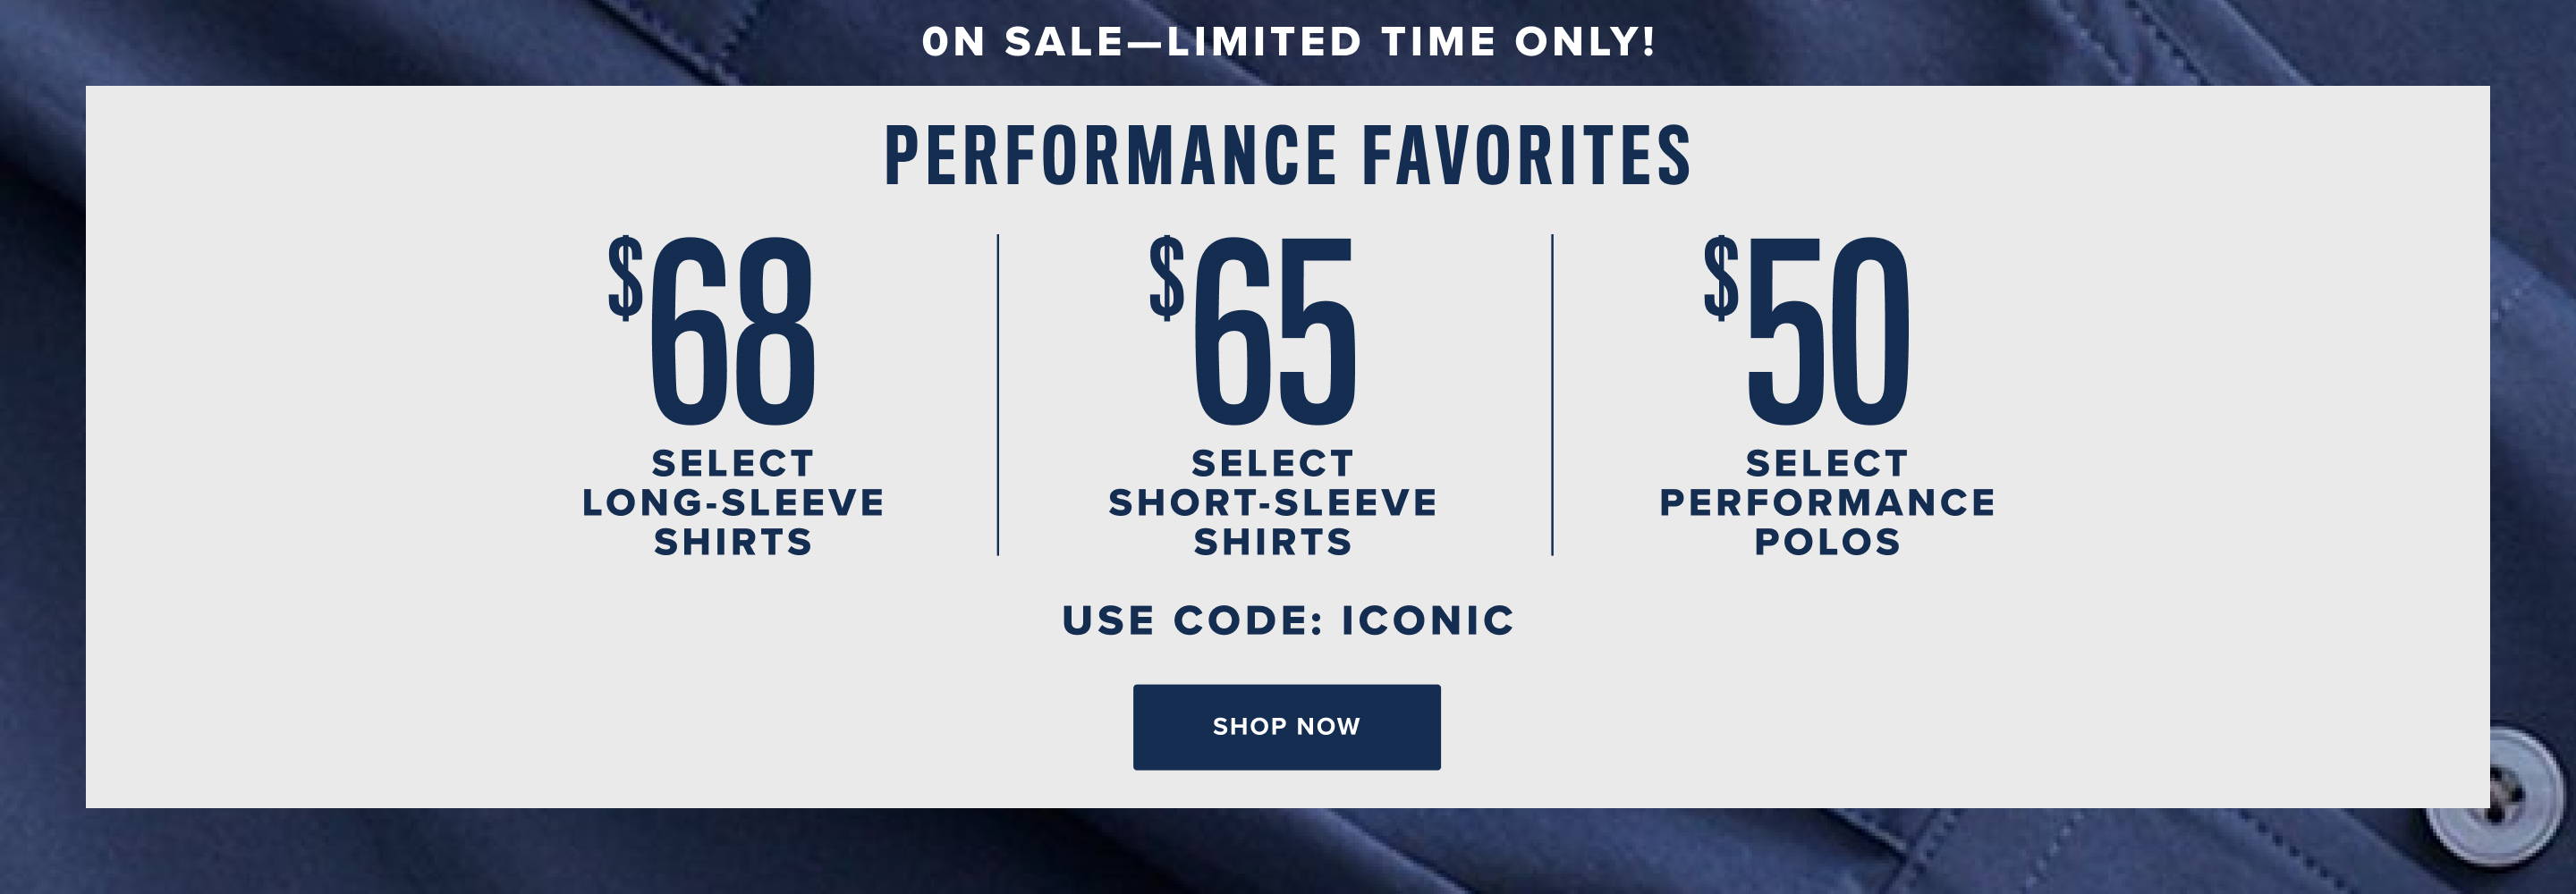 Performance Favorites Sale. Use Code:iconic